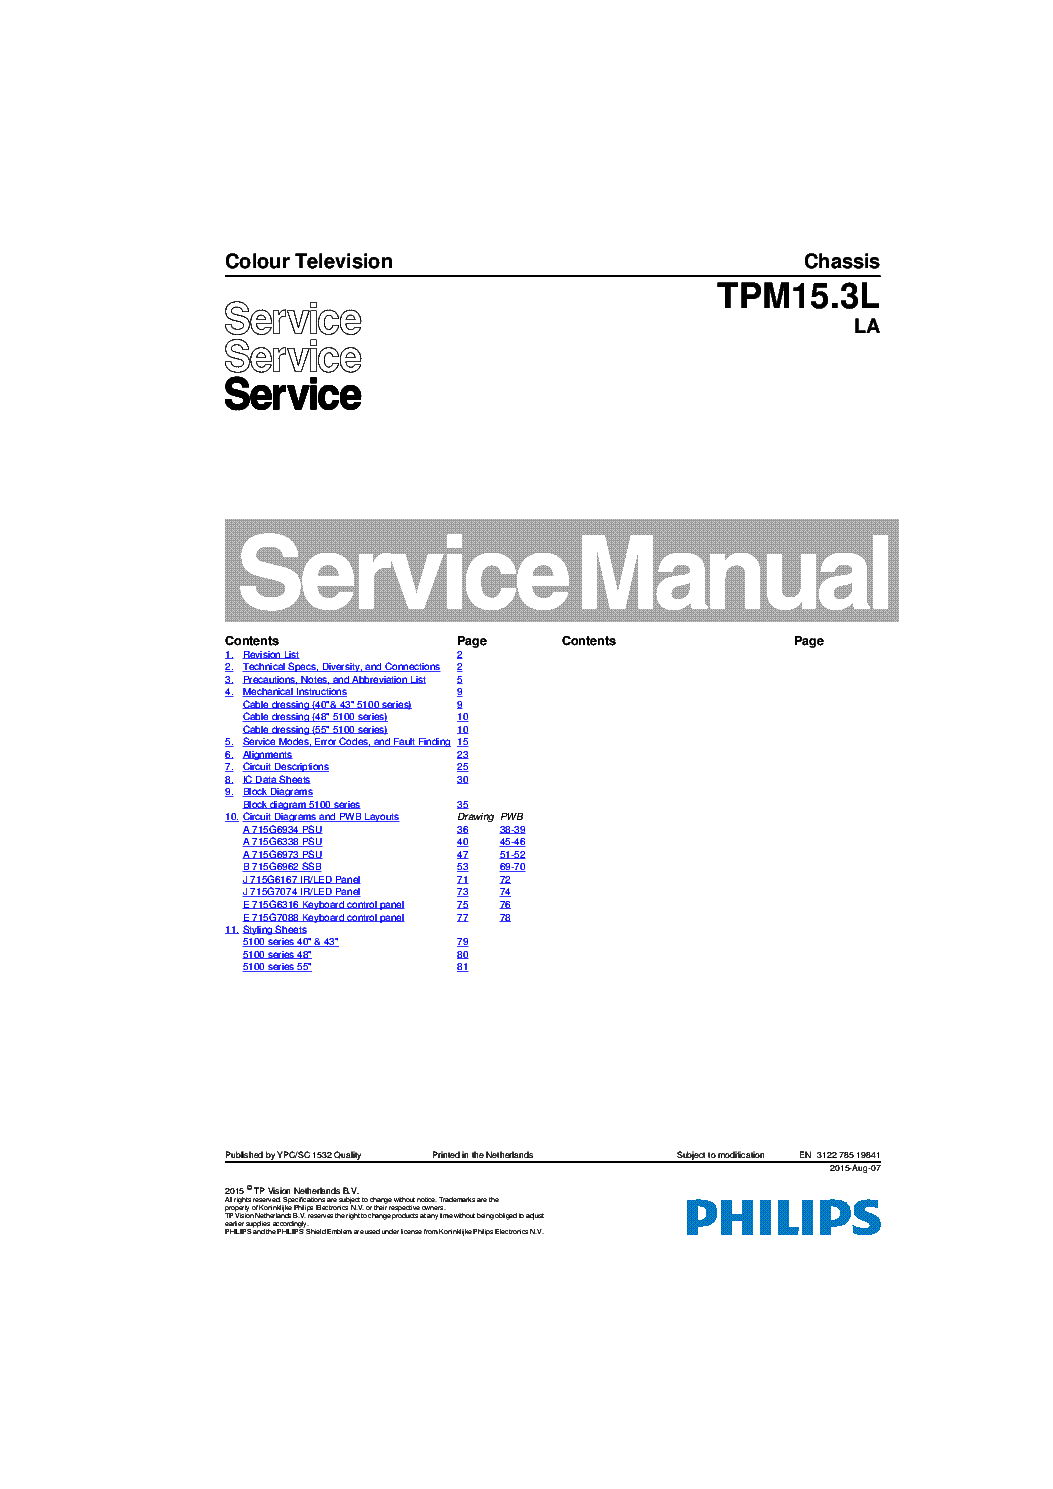 PHILIPS TPM15.3LLA 312278519841 150807 service manual (1st page)